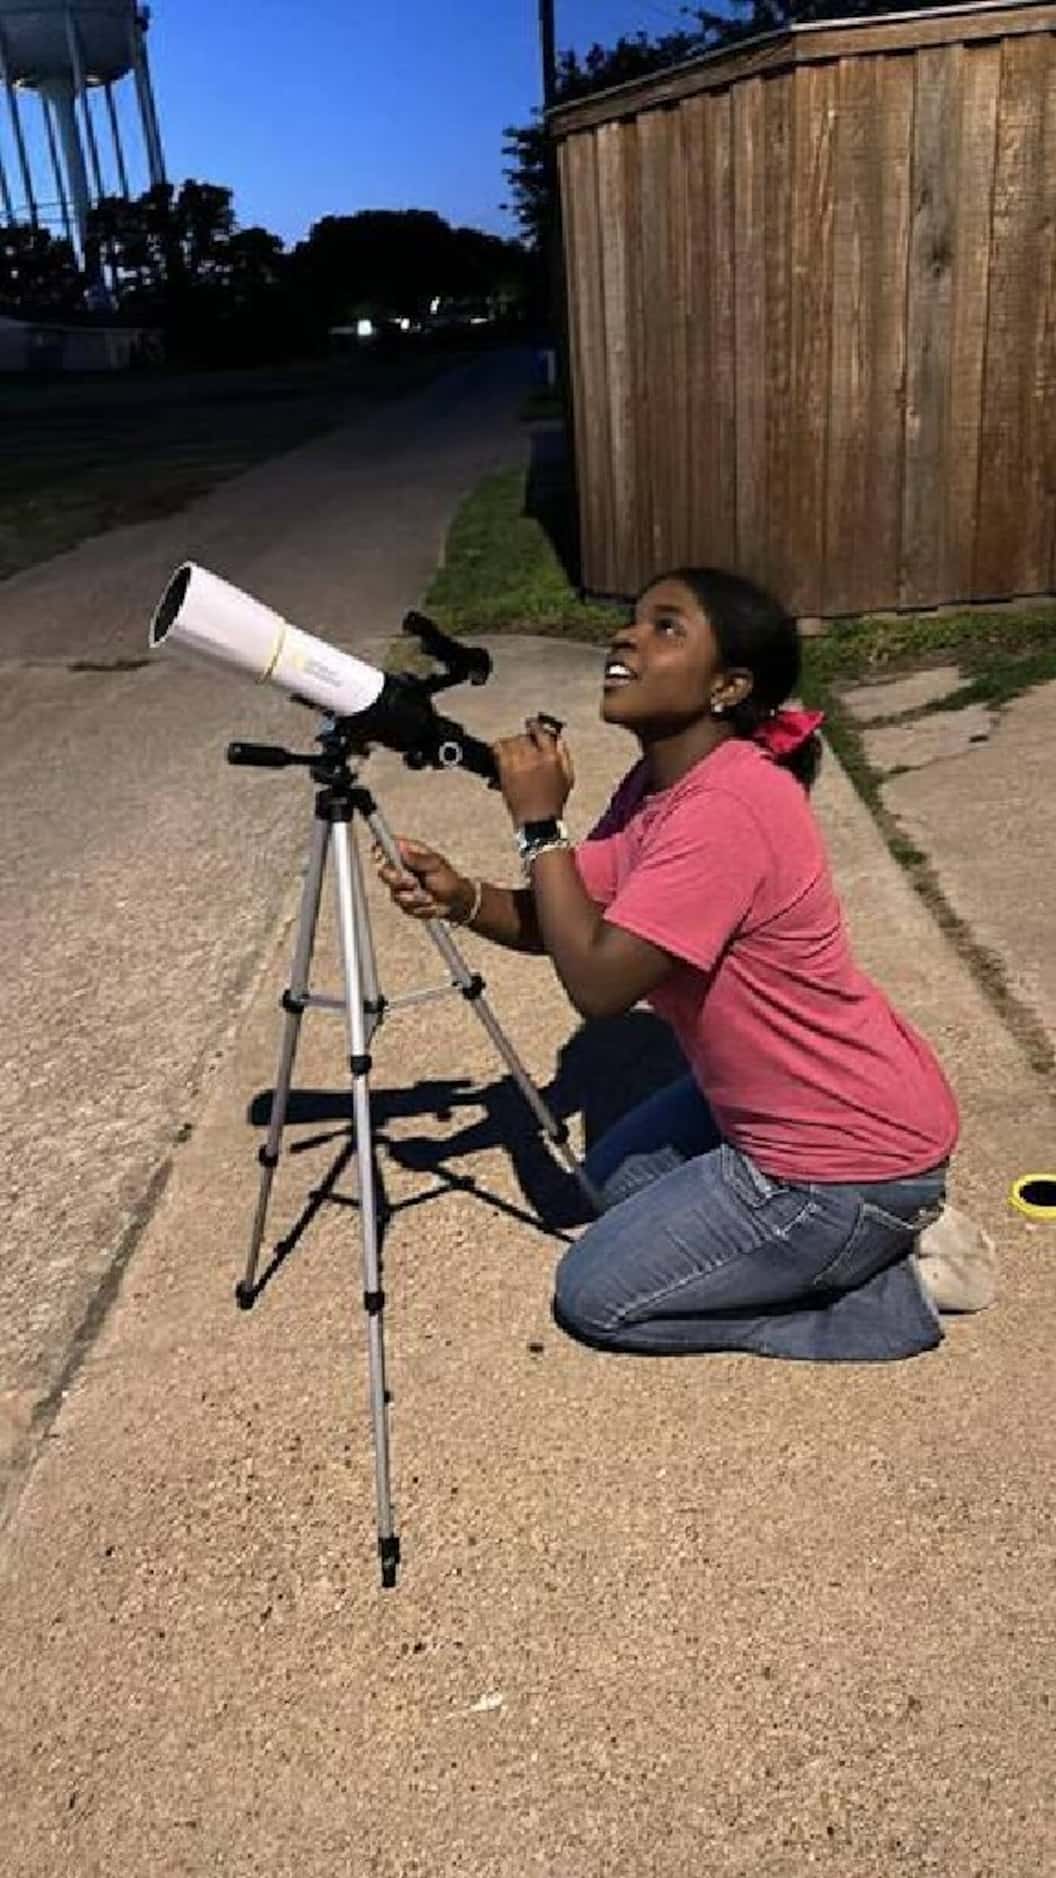 Mariah McDowell, 14, prepares for the total solar eclipse. Provided by Carole Sanders-Miles